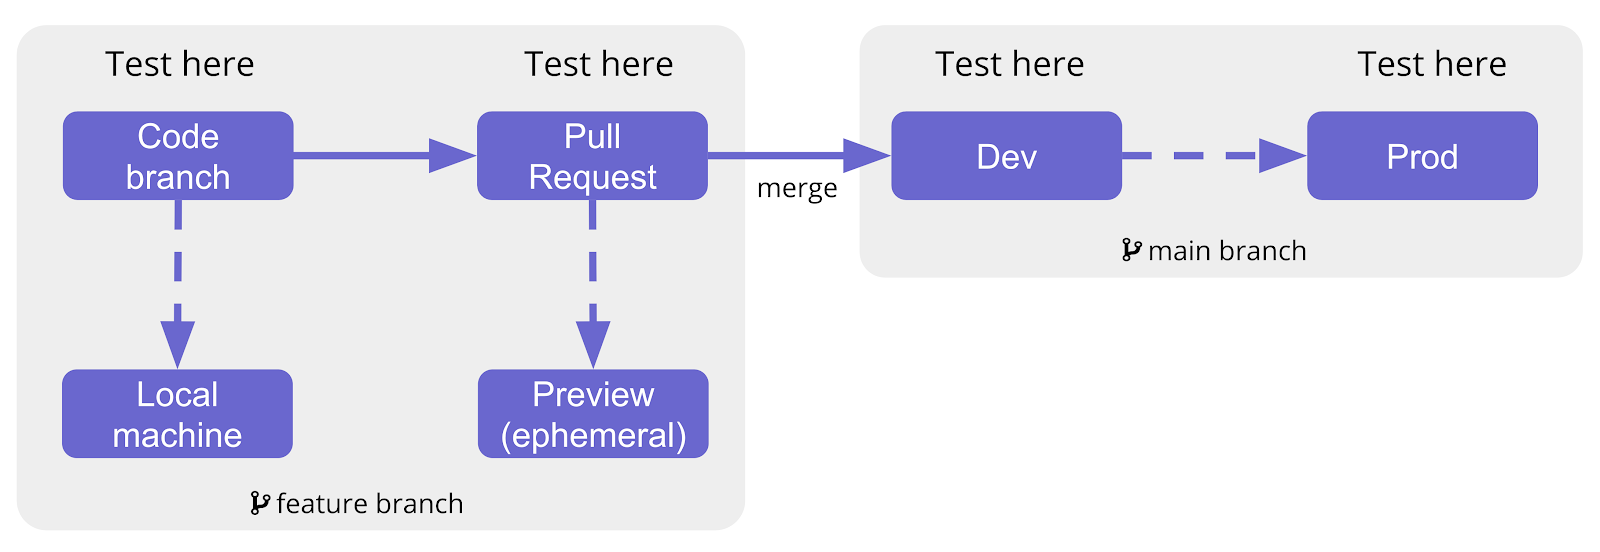 A diagram showing a feature branch merged into the main branch and when testing happens.